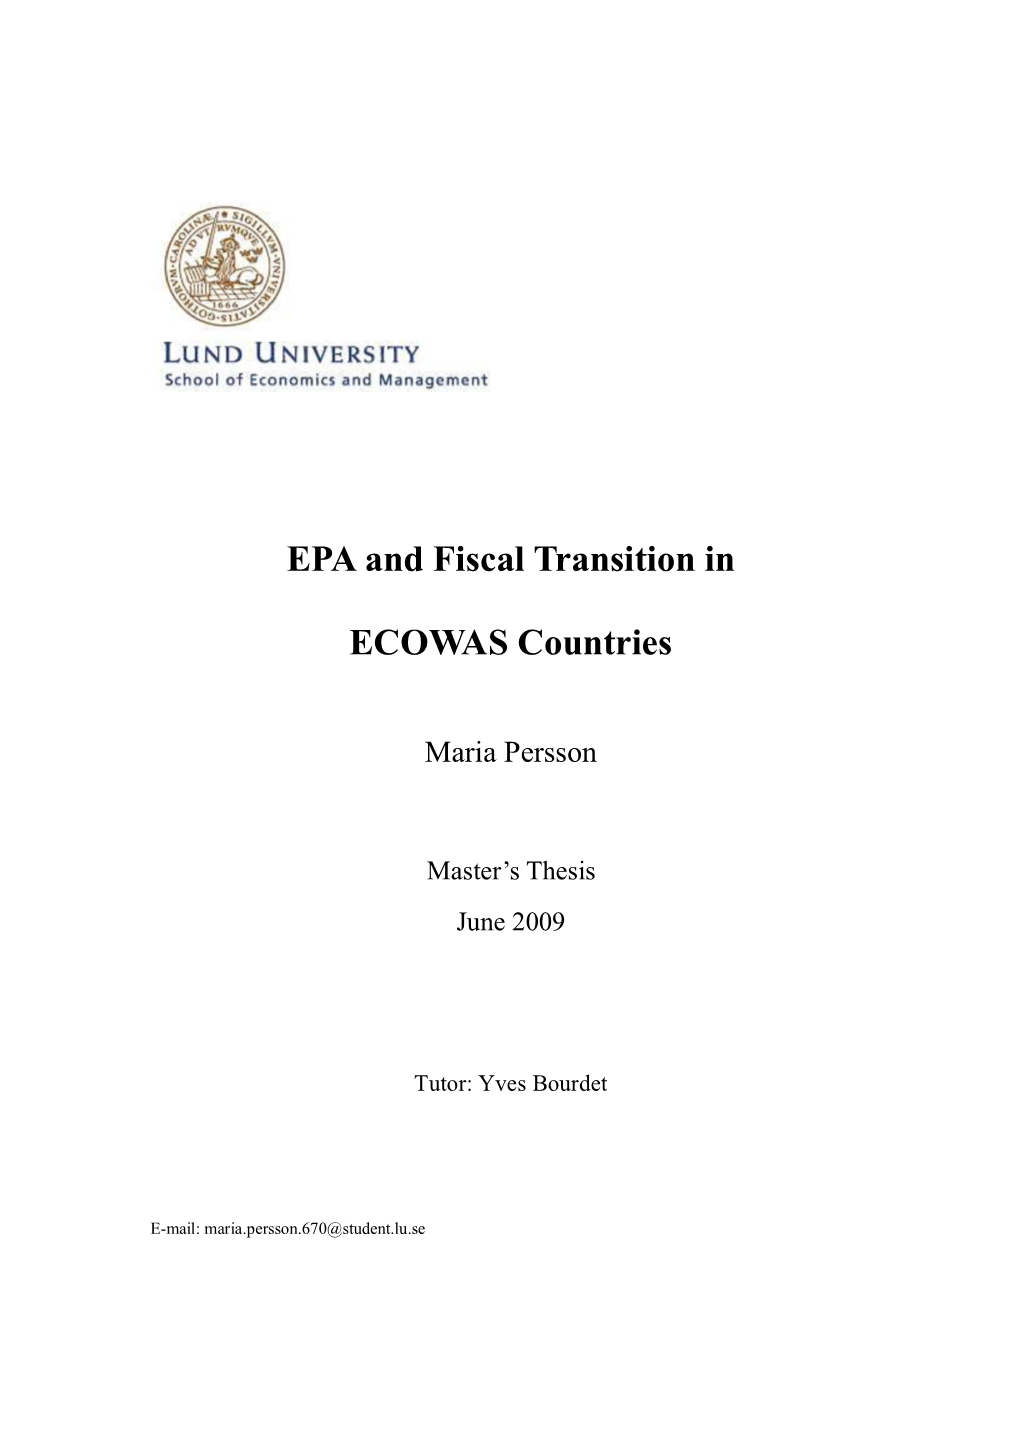 EPA and Fiscal Transition in ECOWAS Countries